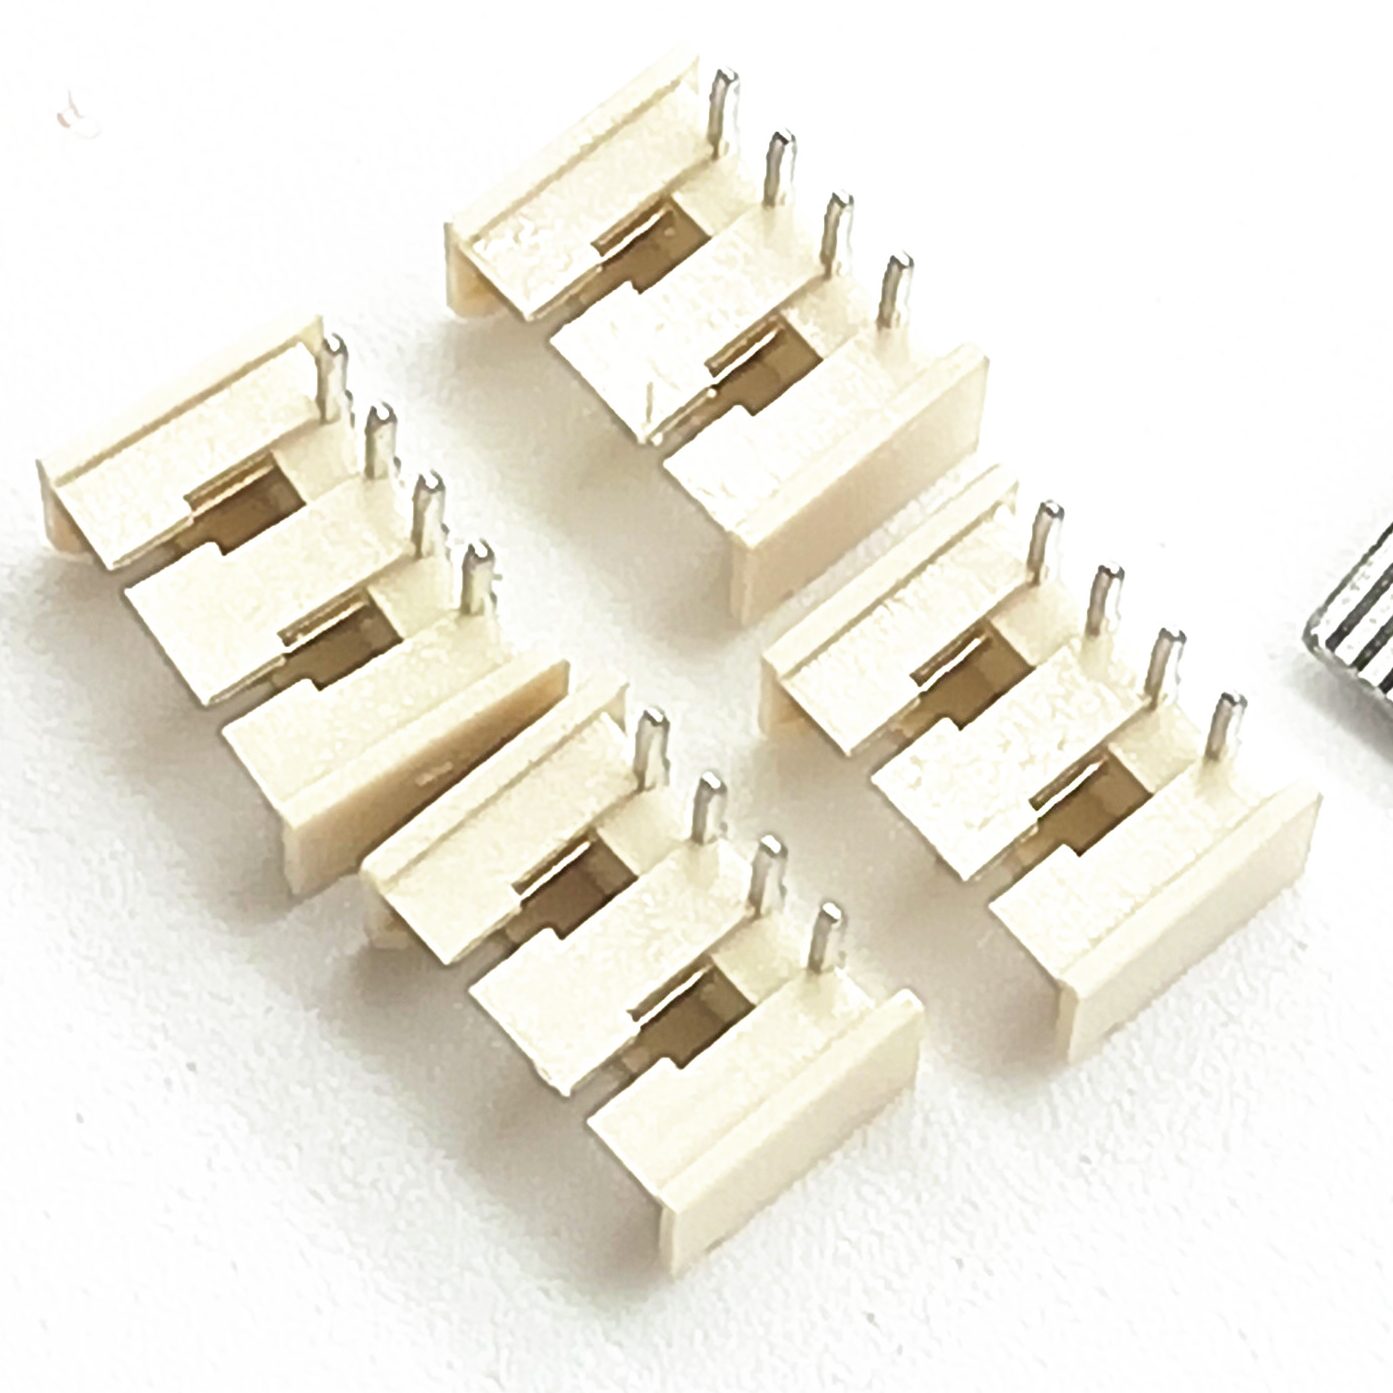 53048-0410 connector boasts a 4-pin design, offering robust and dependable connectivity. Its compact size and quality make it a great choice for diverse industrial uses. 